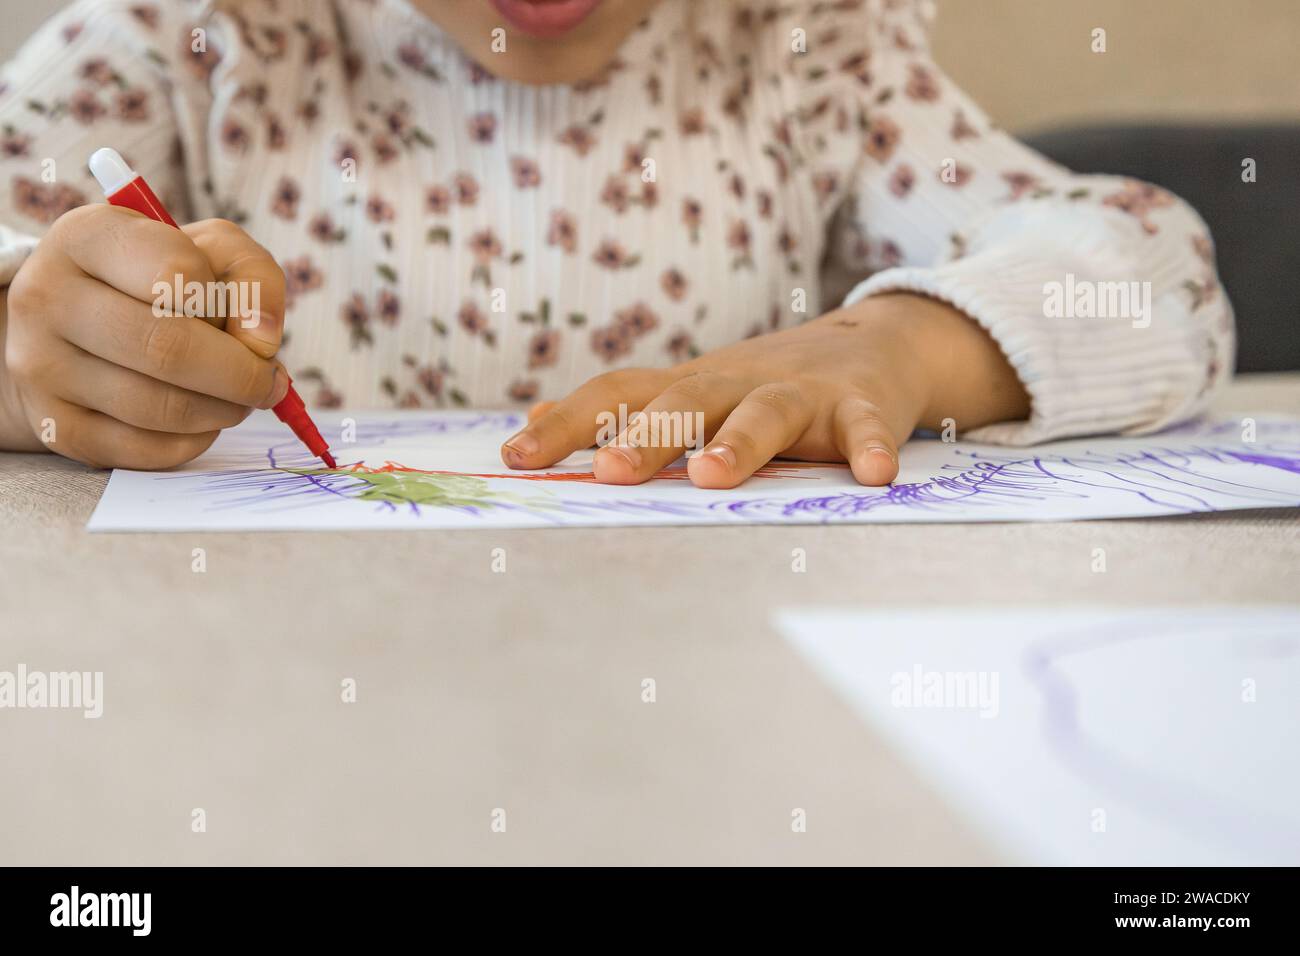 Little caucasian girl painting and drawing on a white sheet with markers, exploring imagination, concentration and agility with her hands. Close up Stock Photo